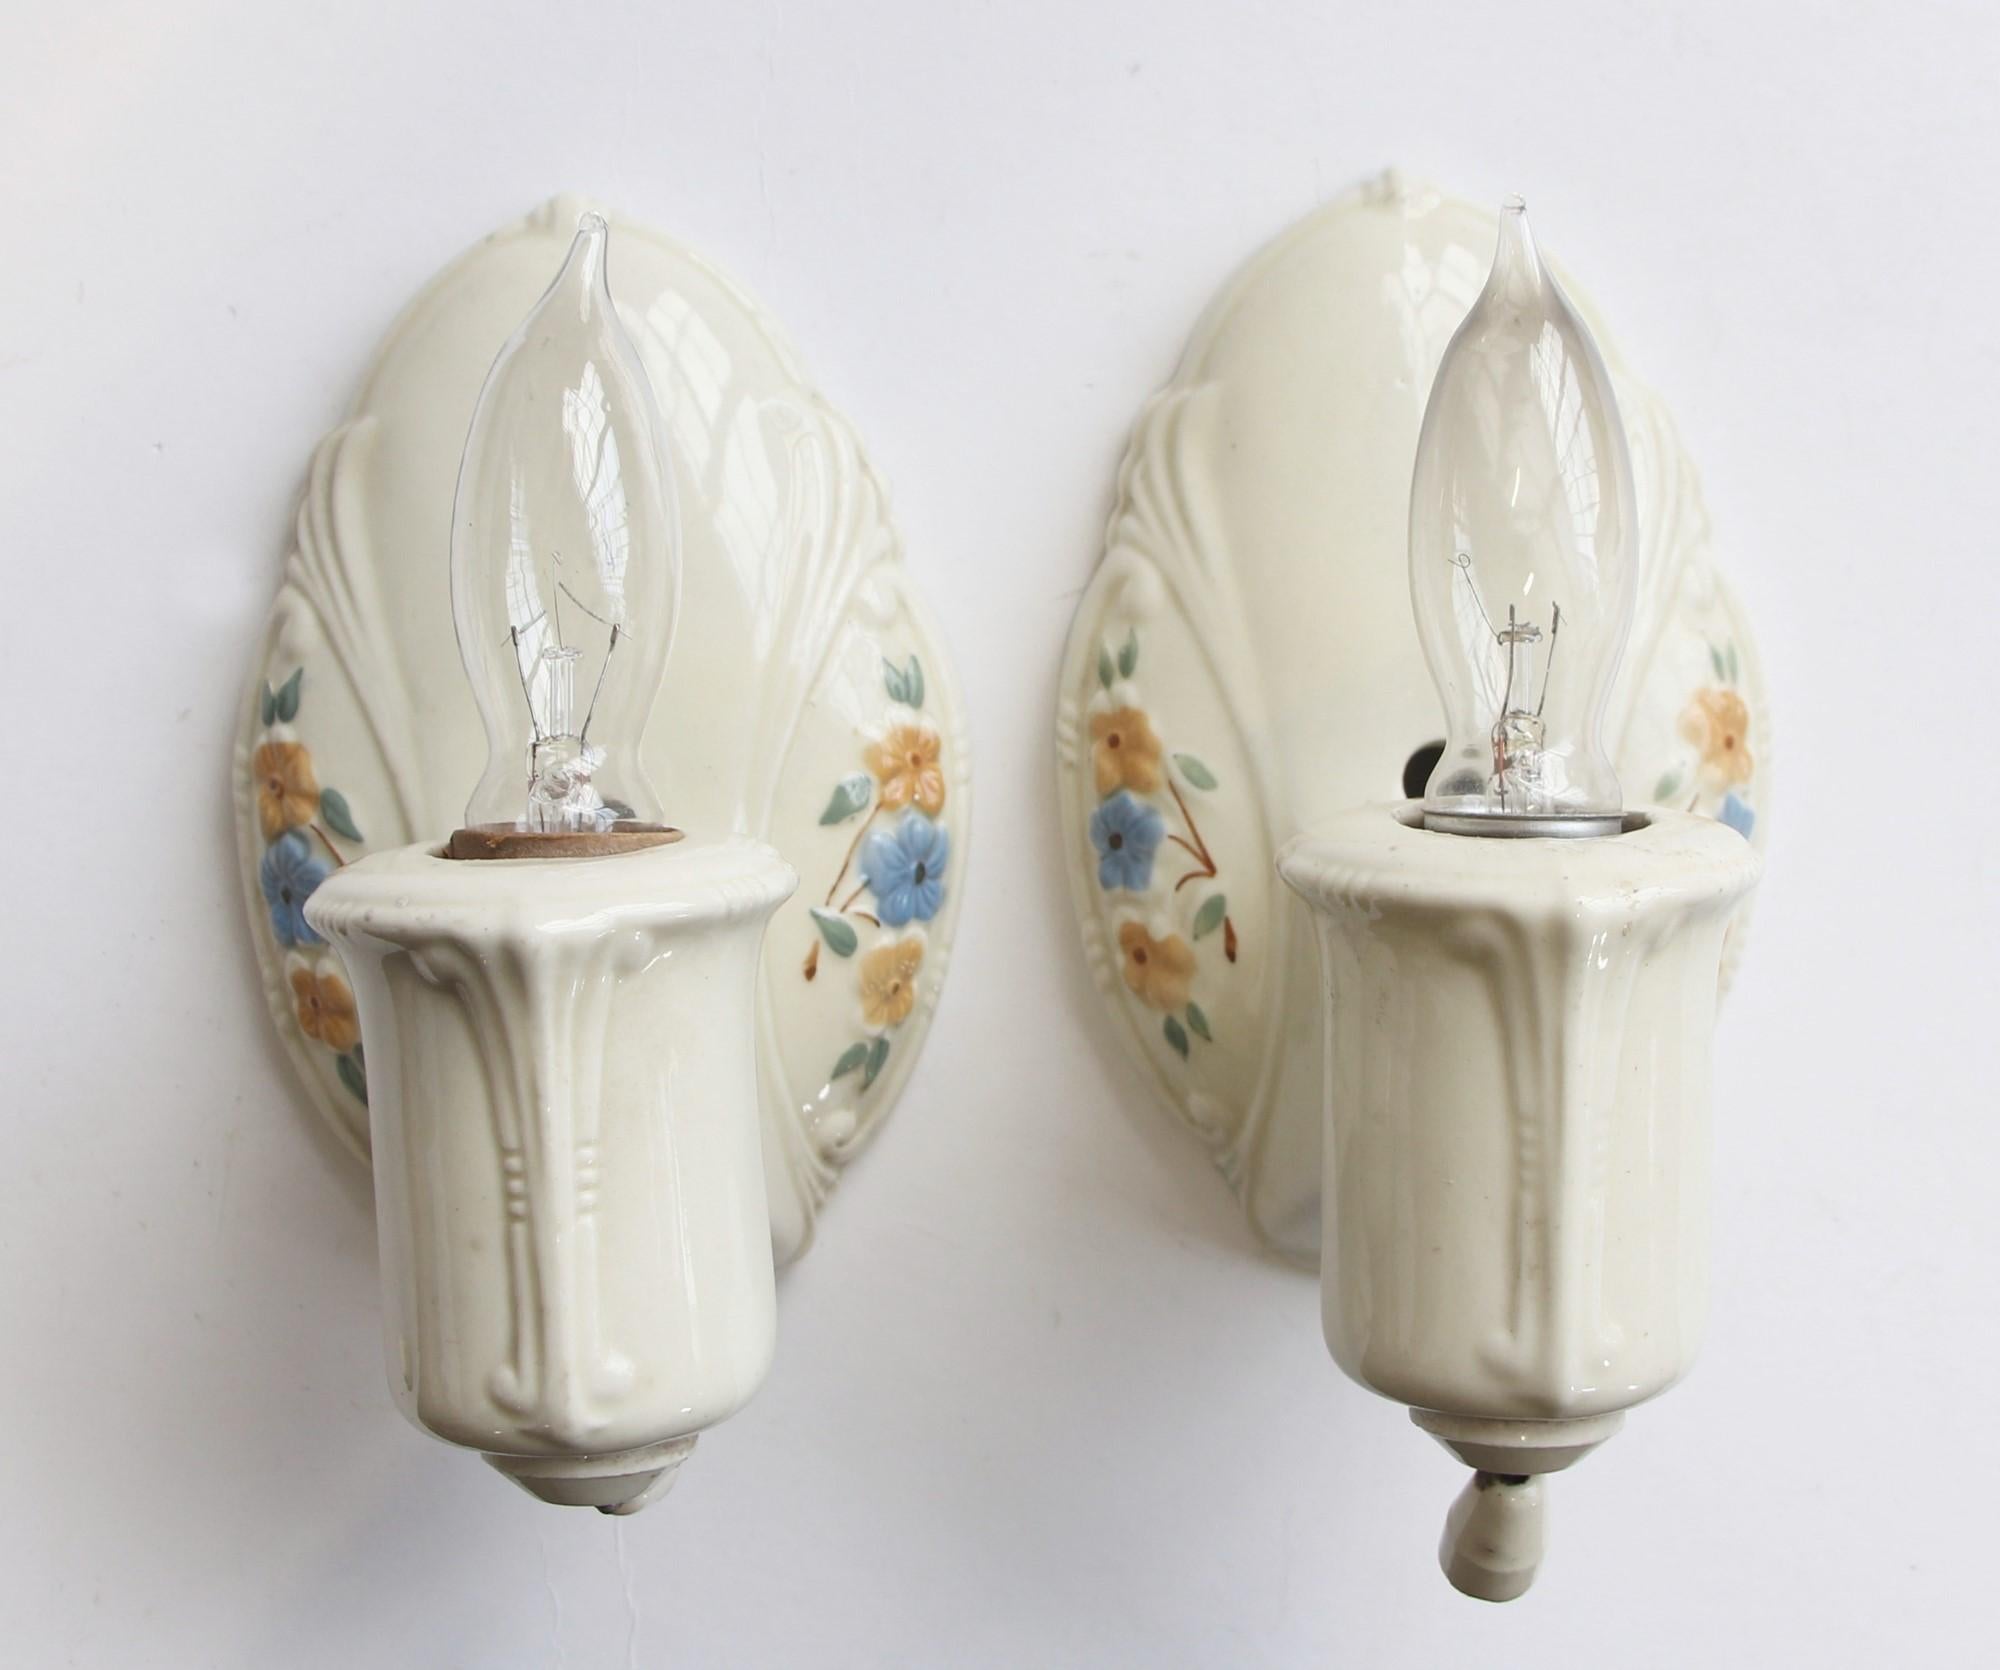 Antique 1910s pair of white ceramic porcelain sconces. Done in a floral pattern of orange and blue flowers with green leaves. Priced as a pair. These will be rewired before shipping. This can be seen at our 400 Gilligan St location in Scranton, PA.